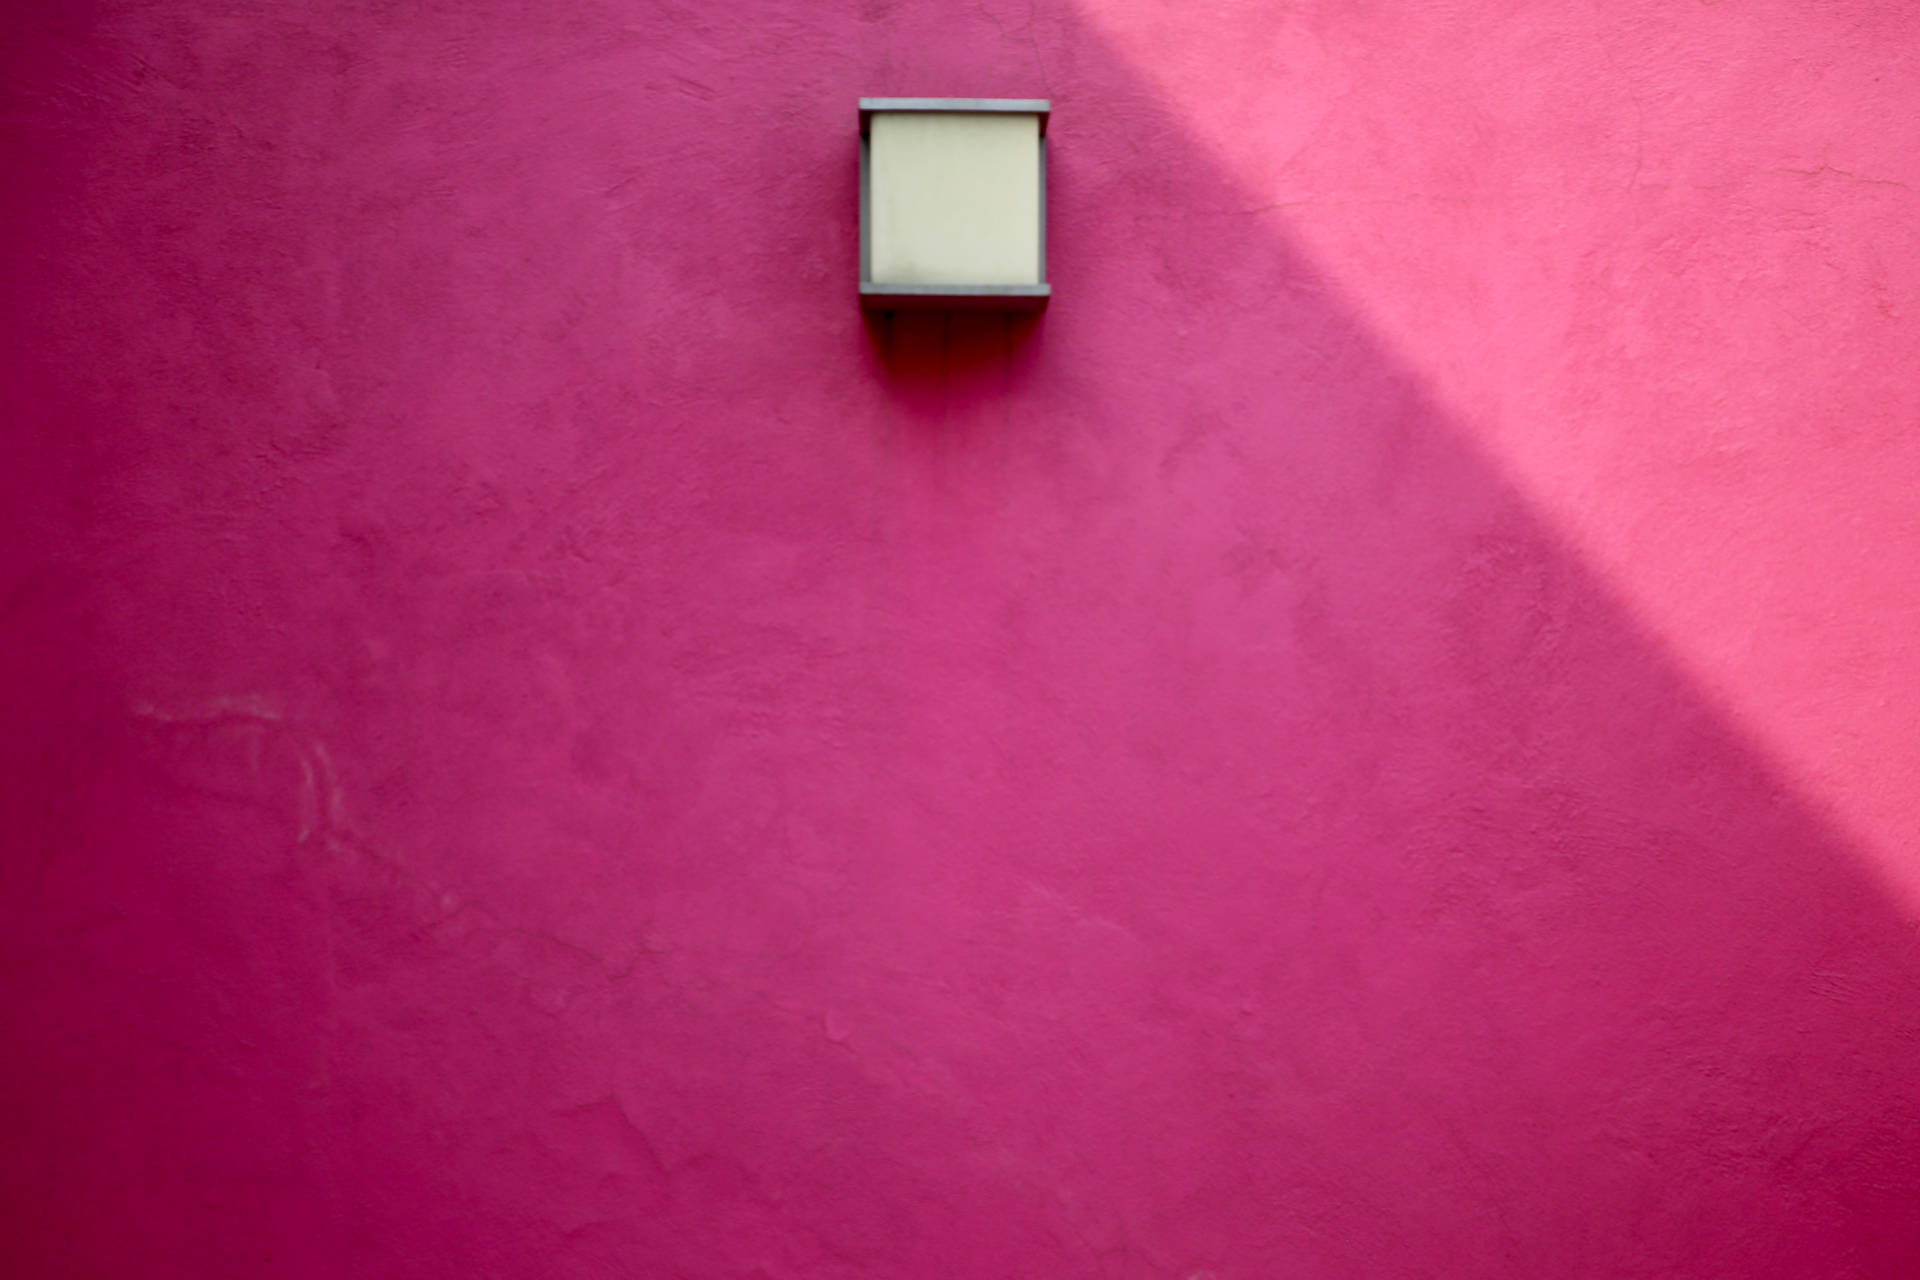 Bright Pink Wall With White Box